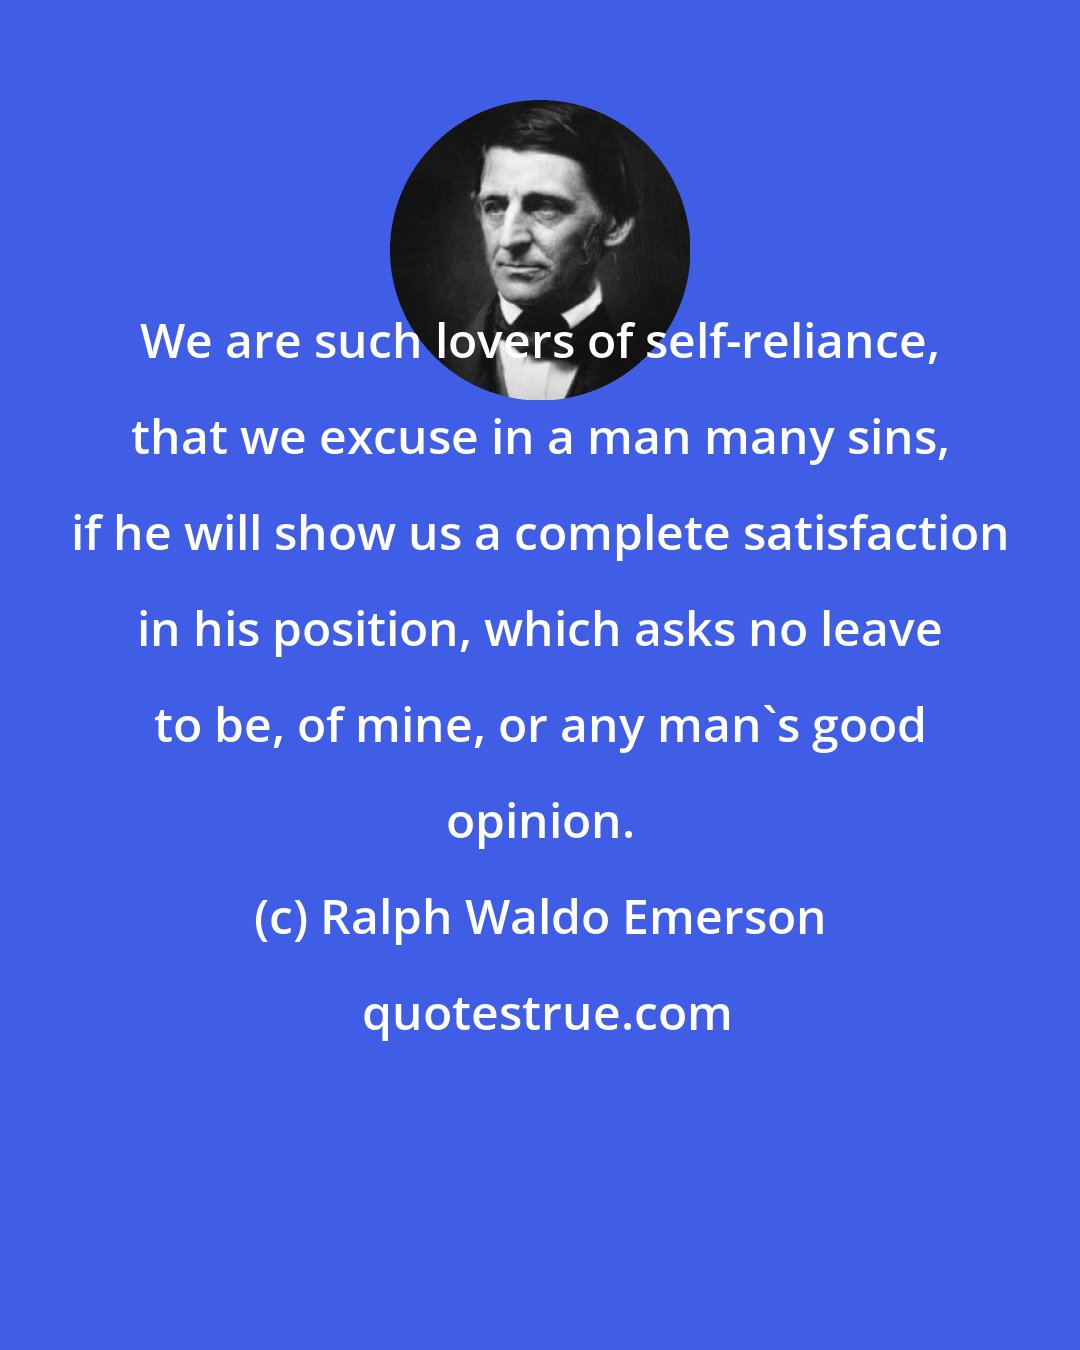 Ralph Waldo Emerson: We are such lovers of self-reliance, that we excuse in a man many sins, if he will show us a complete satisfaction in his position, which asks no leave to be, of mine, or any man's good opinion.